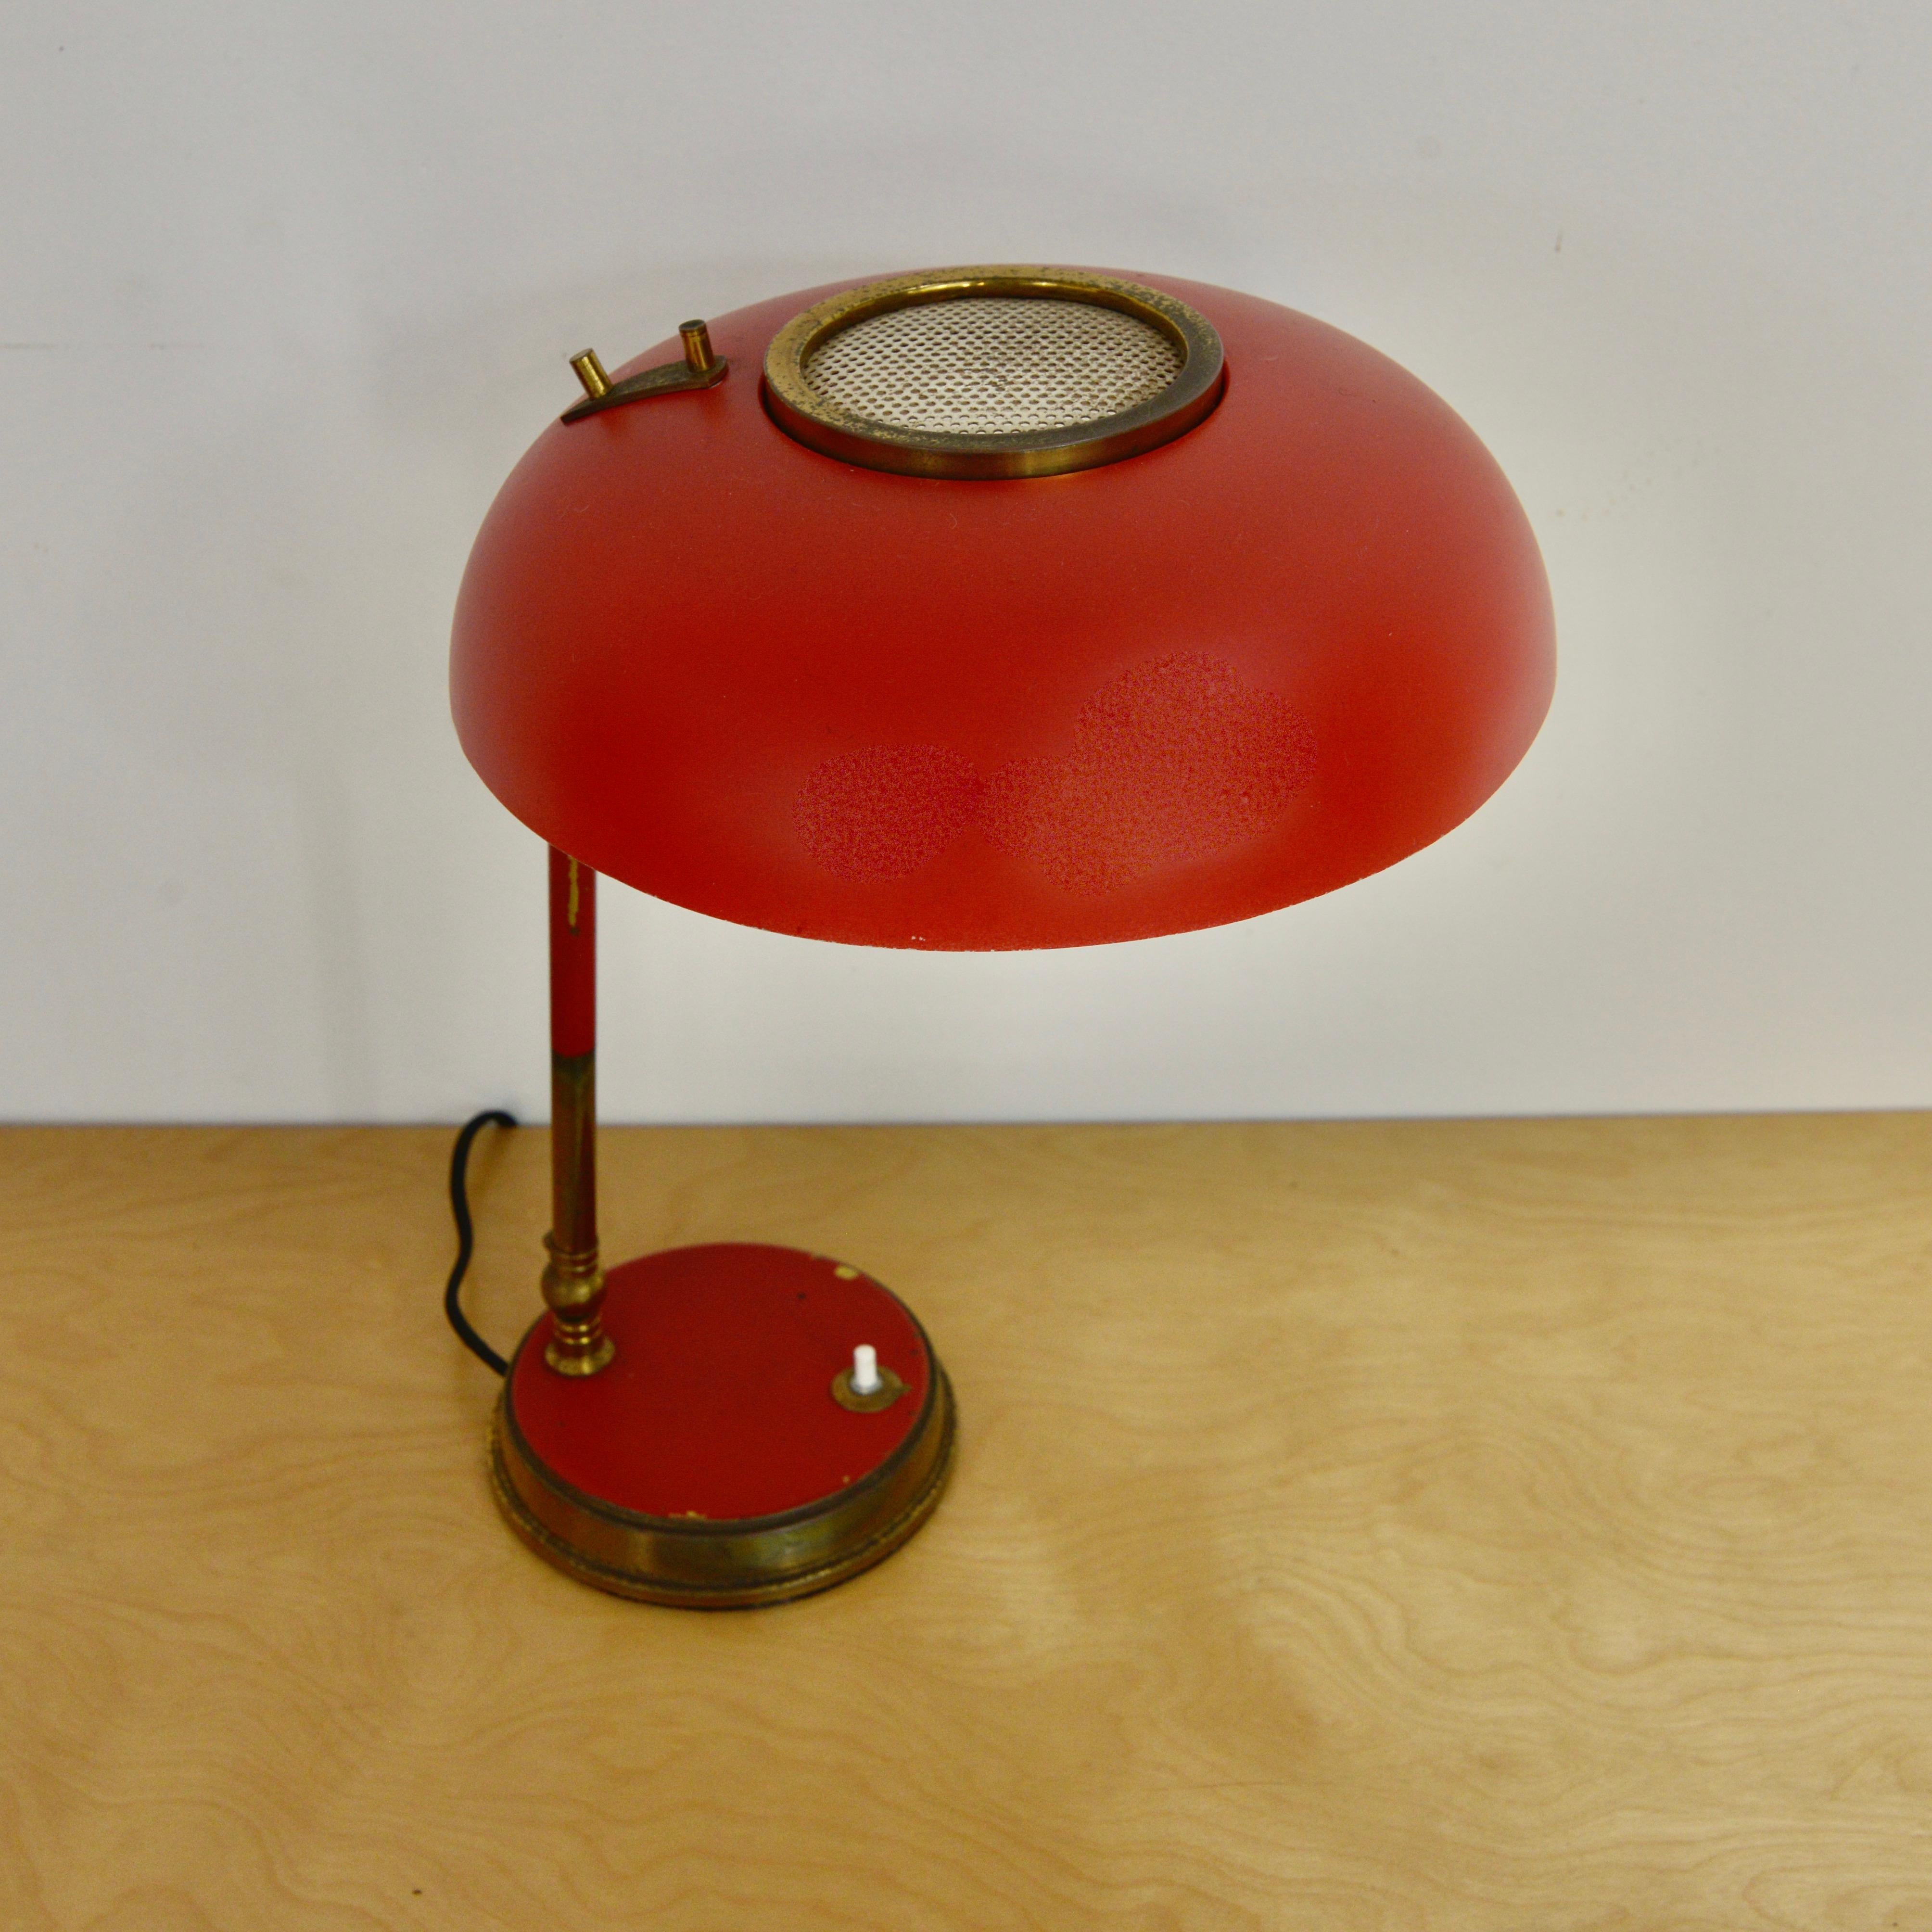 Fantastic red and brass Italian table lamp from Oscar Torlasco from the 1950s. Naturally aged brass. Shade and stem adjust for angling of light. Fully rewired for the US with a single E26 medium based socket.
Measurements:
Height 13”
Diameter 10”.